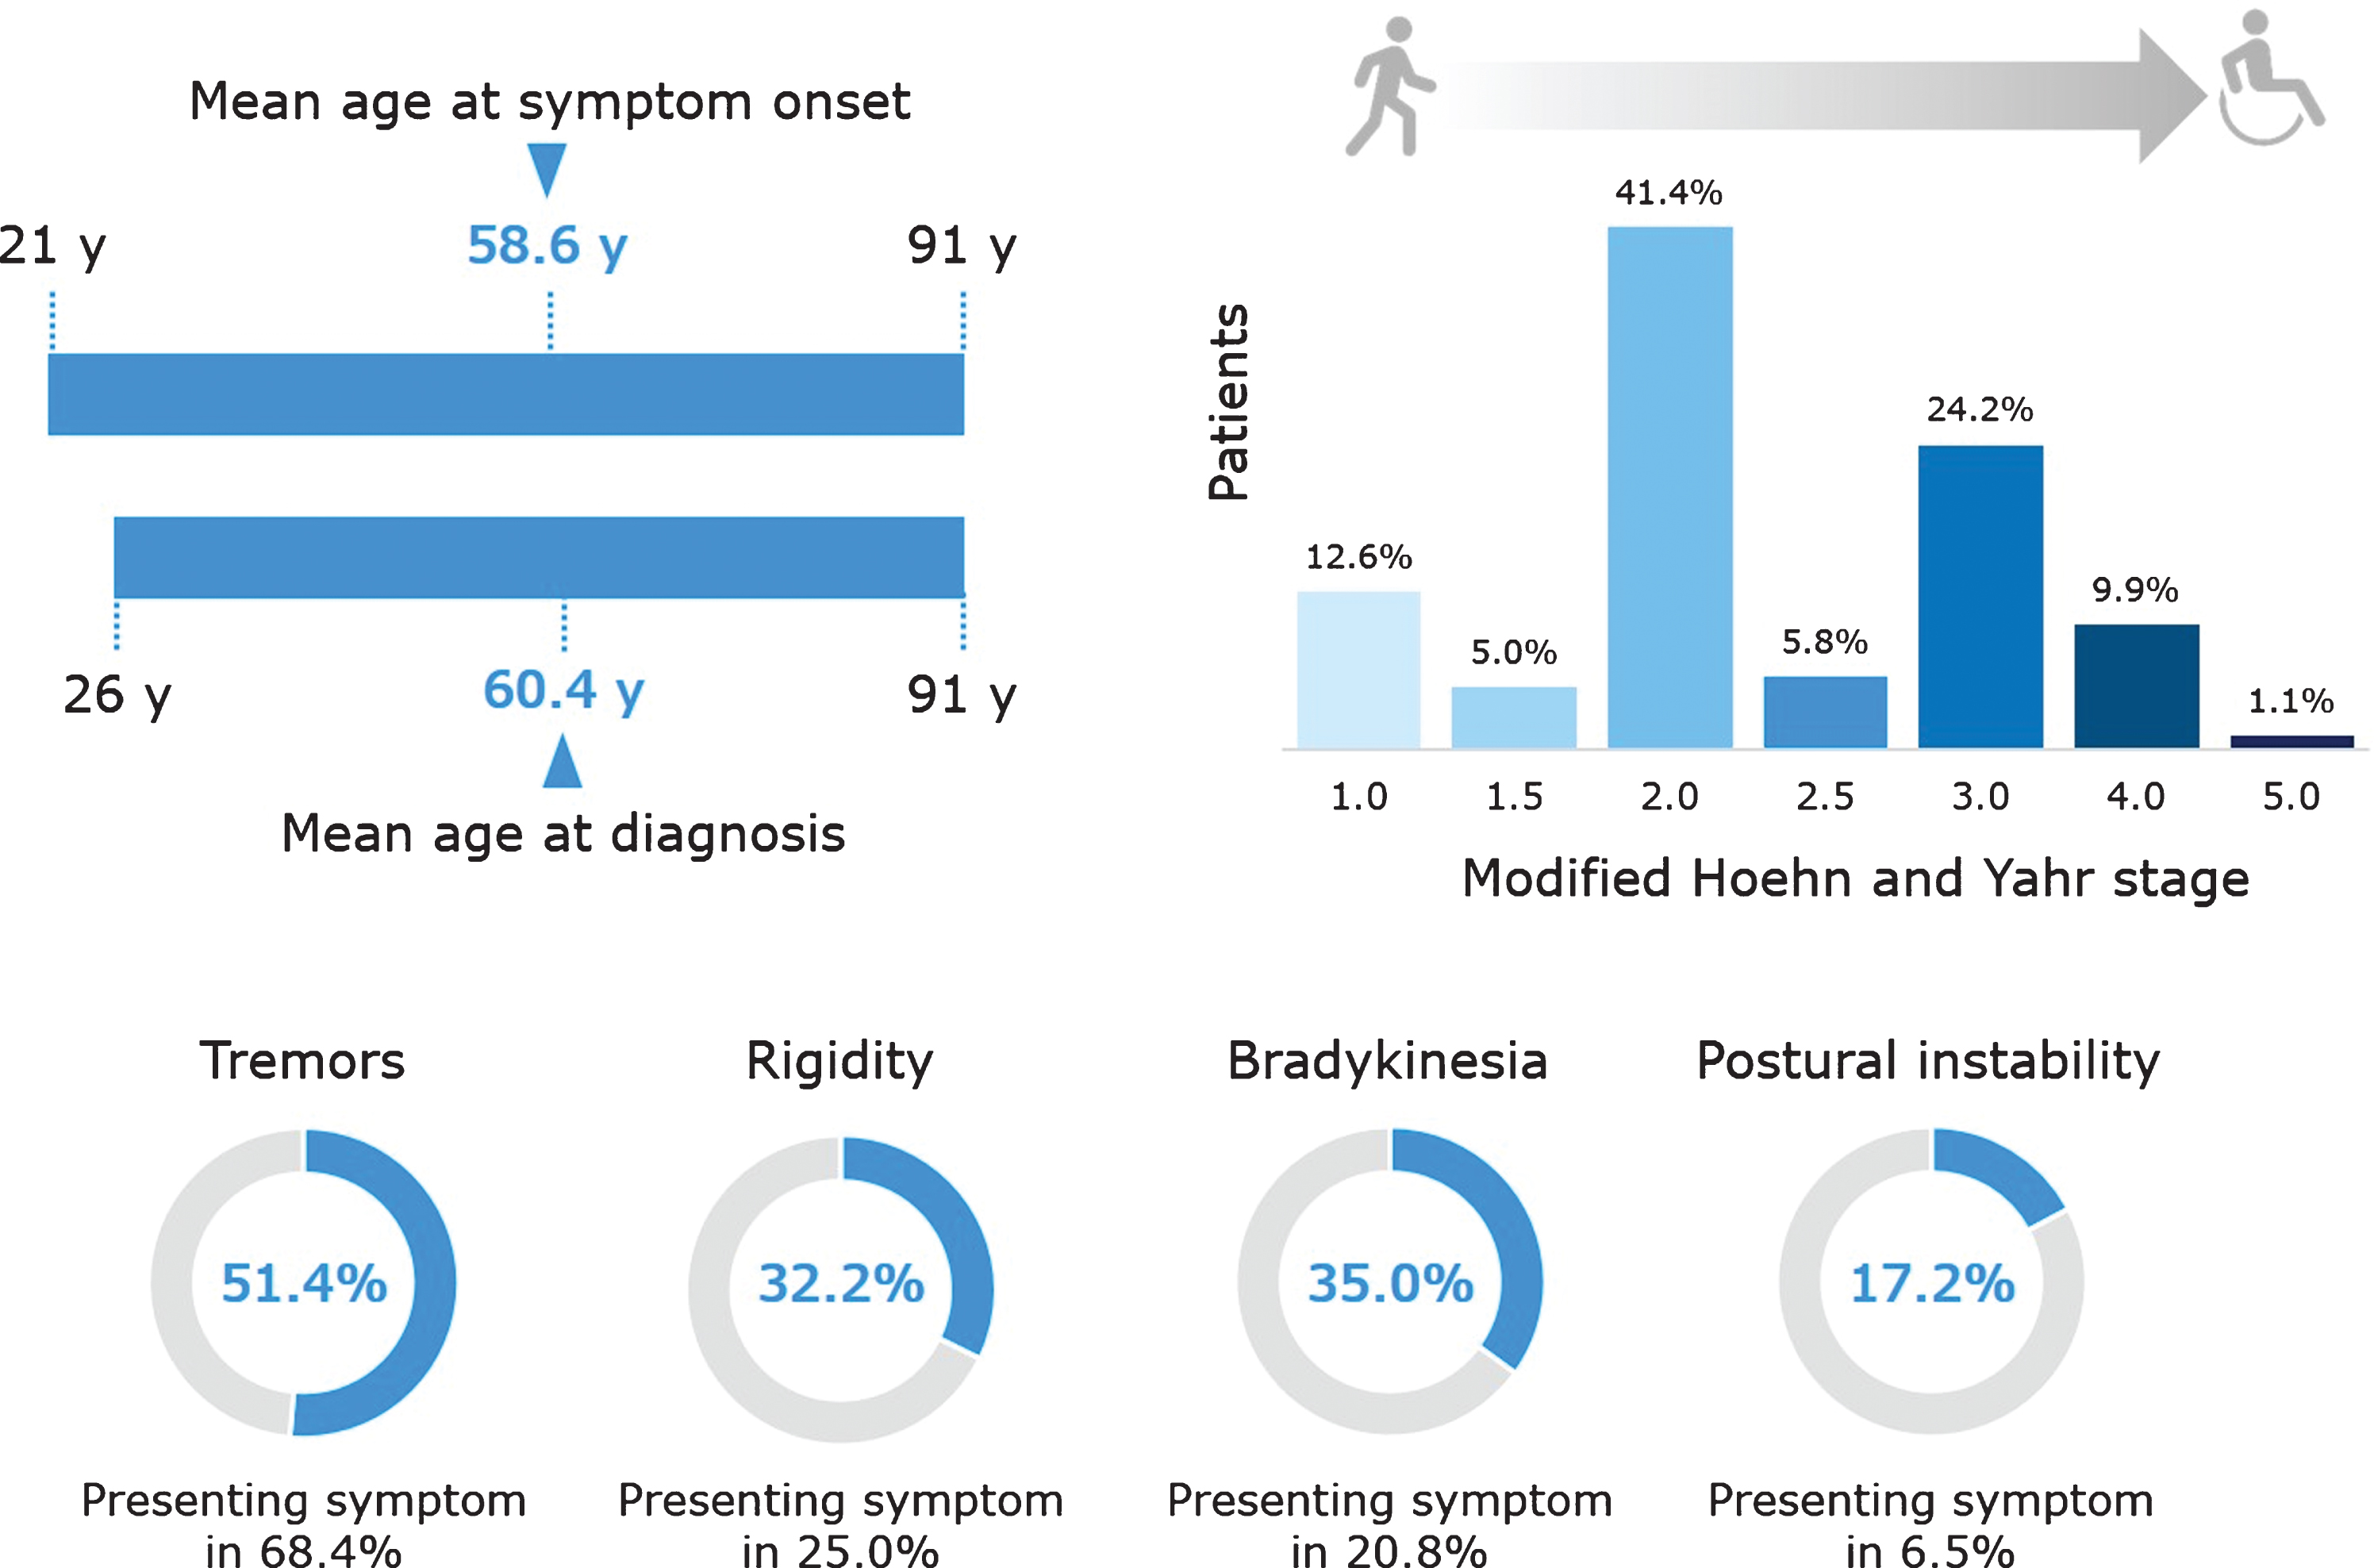 Key clinical characteristics of patients in the Quebec Parkinson Network cohort. Data are presented for the 1070 patients with PD, except the following for which data were not available for all patients: age at symptom onset (n = 518), age at diagnosis (n = 921), modified Hoehn and Yahr stage (n = 637), postural instability (n = 697), tremor as presenting symptom (n = 863), rigidity as presenting symptom (n = 748), bradykinesia as presenting symptom (n = 787), and postural instability as presenting symptom (n = 724).